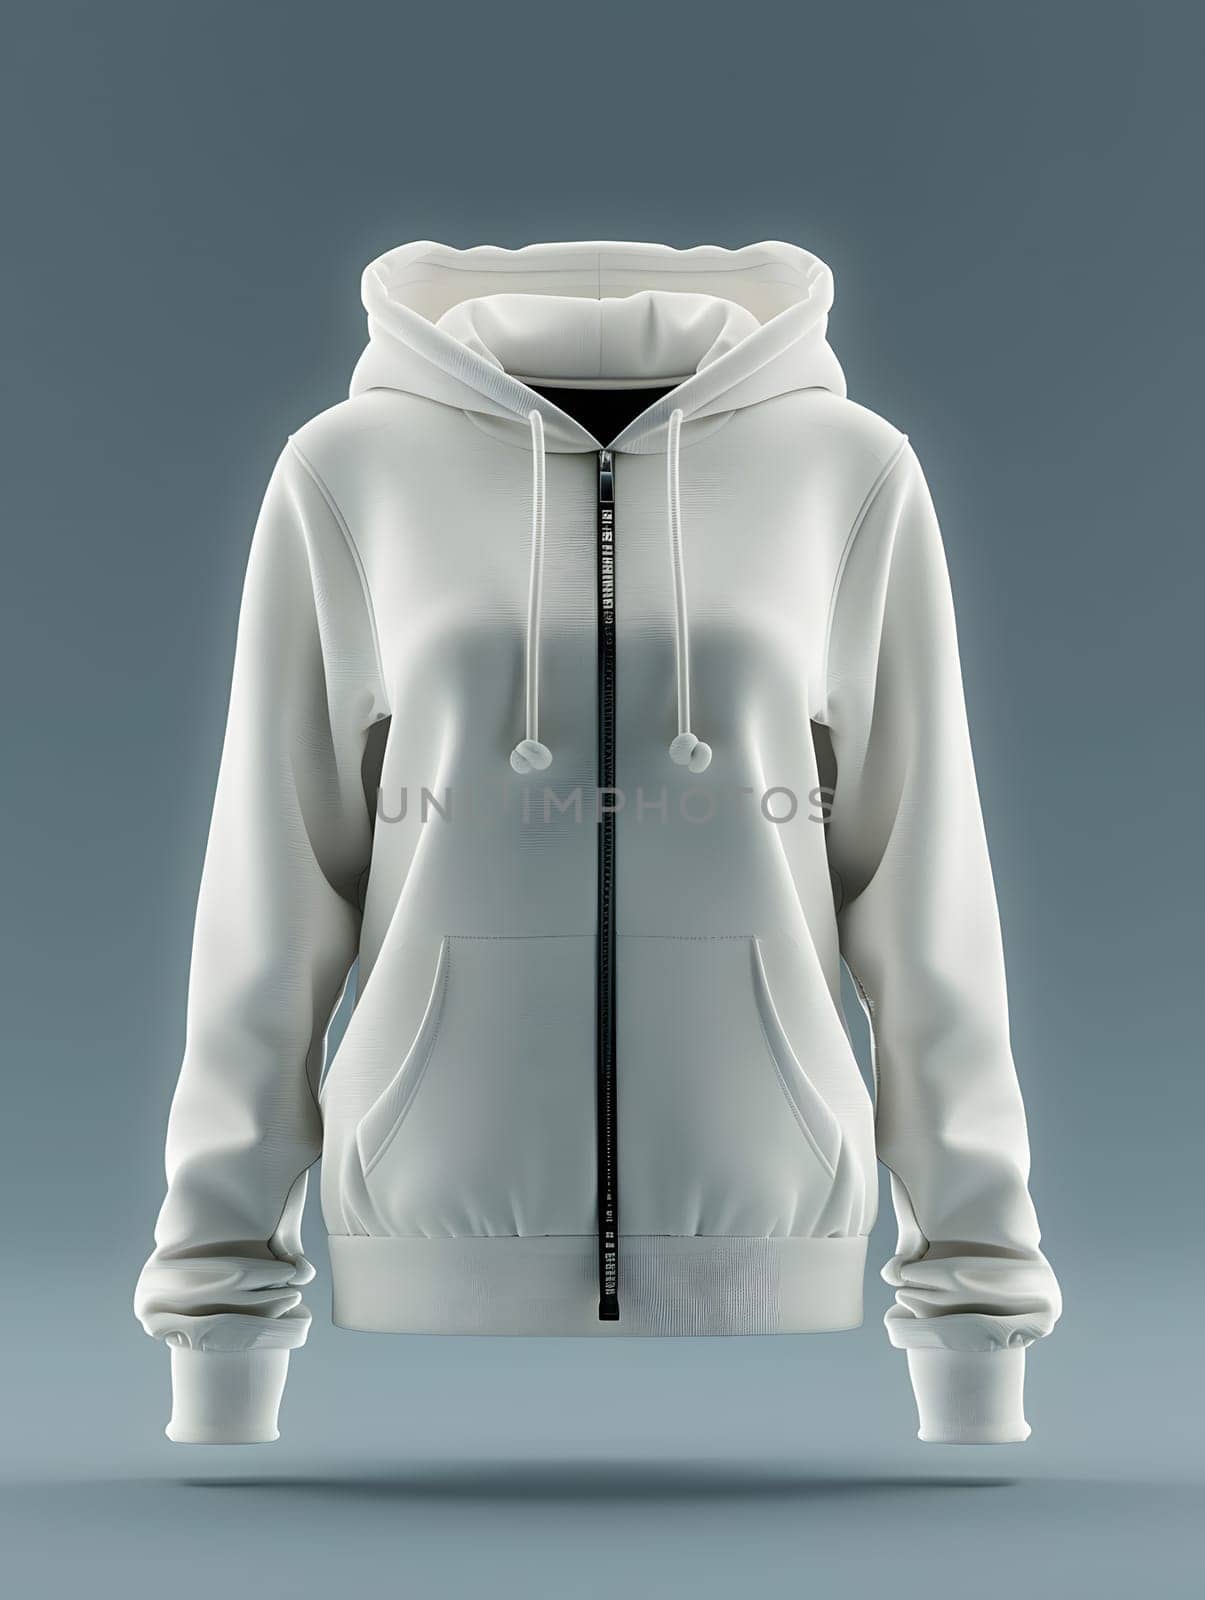 Electric blue hoodie with zipper on grey background by Nadtochiy